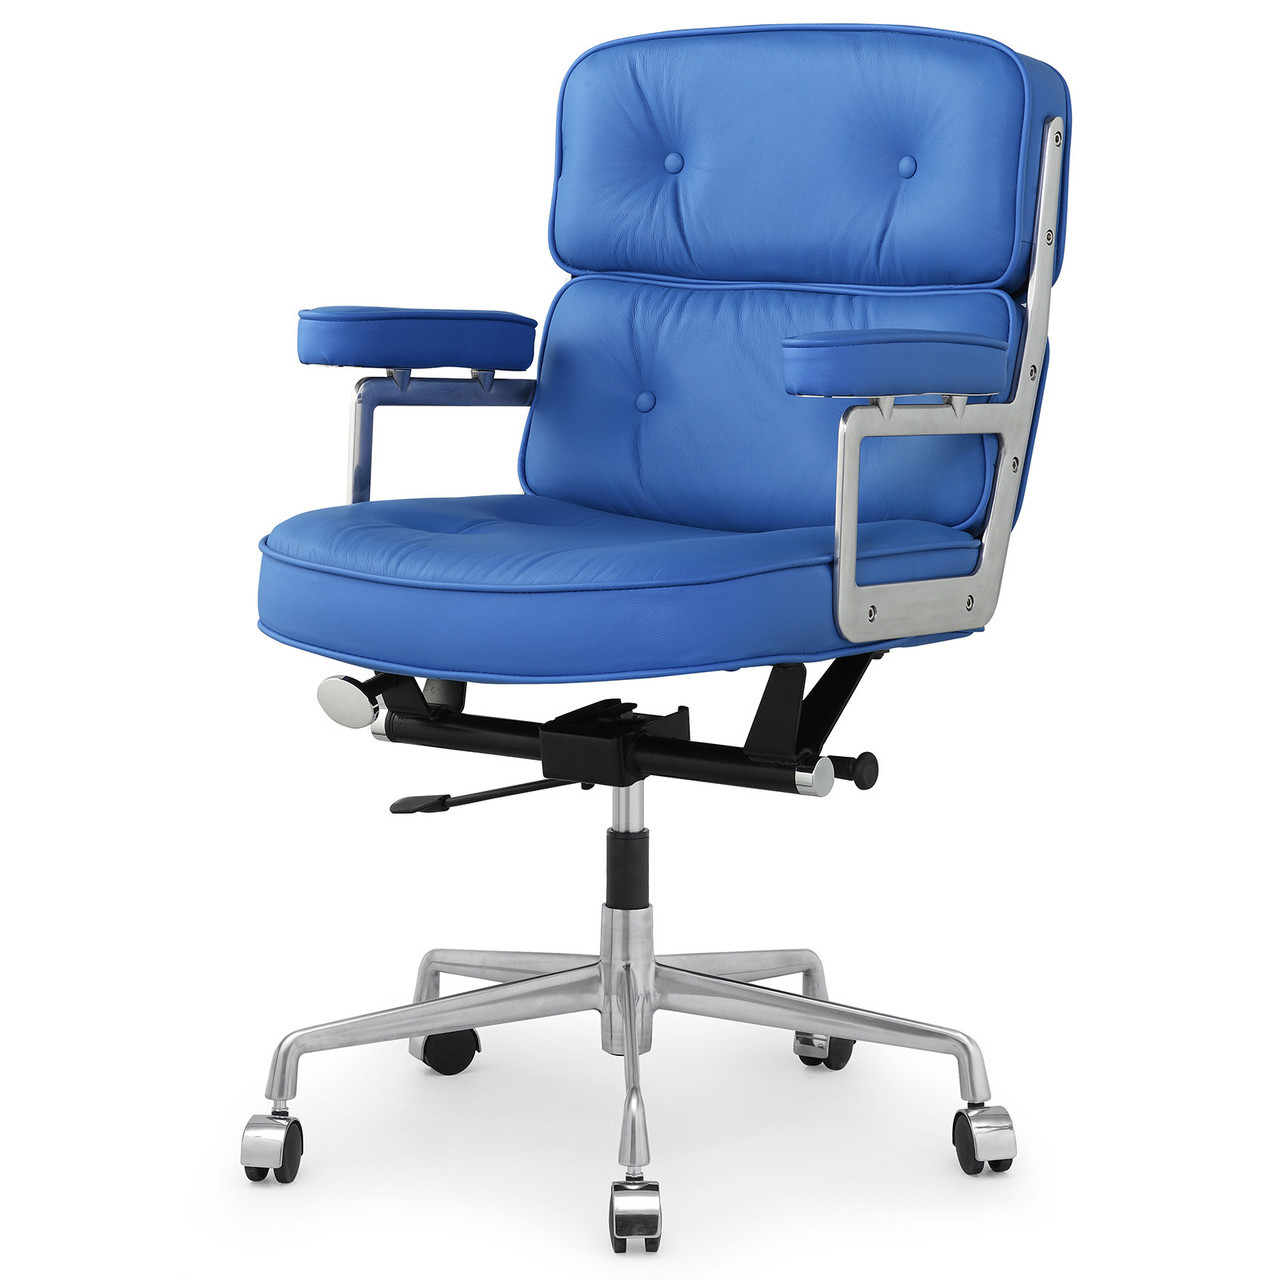 Blue Italian Leather M340 Executive Office Chair | Zin Home